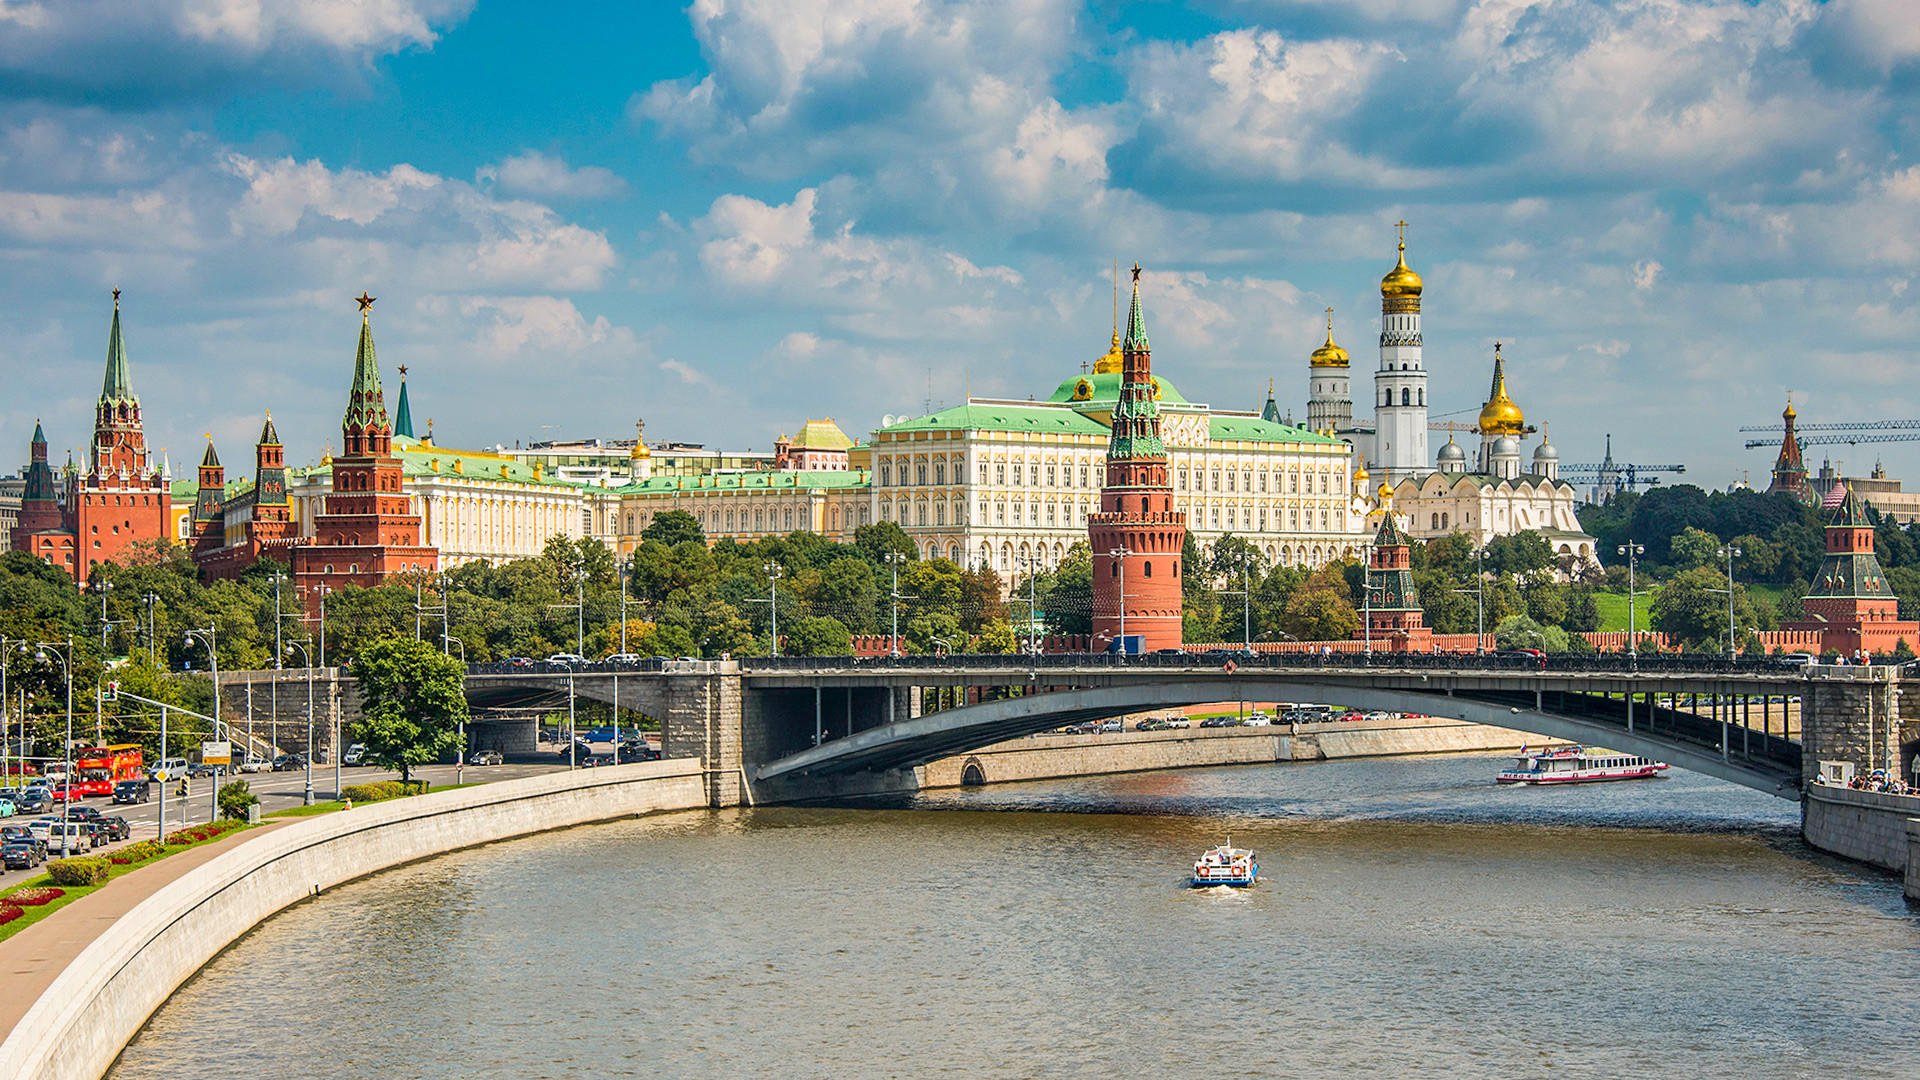 20 facts about 20 Kremlin towers (PHOTOS) - Russia Beyond